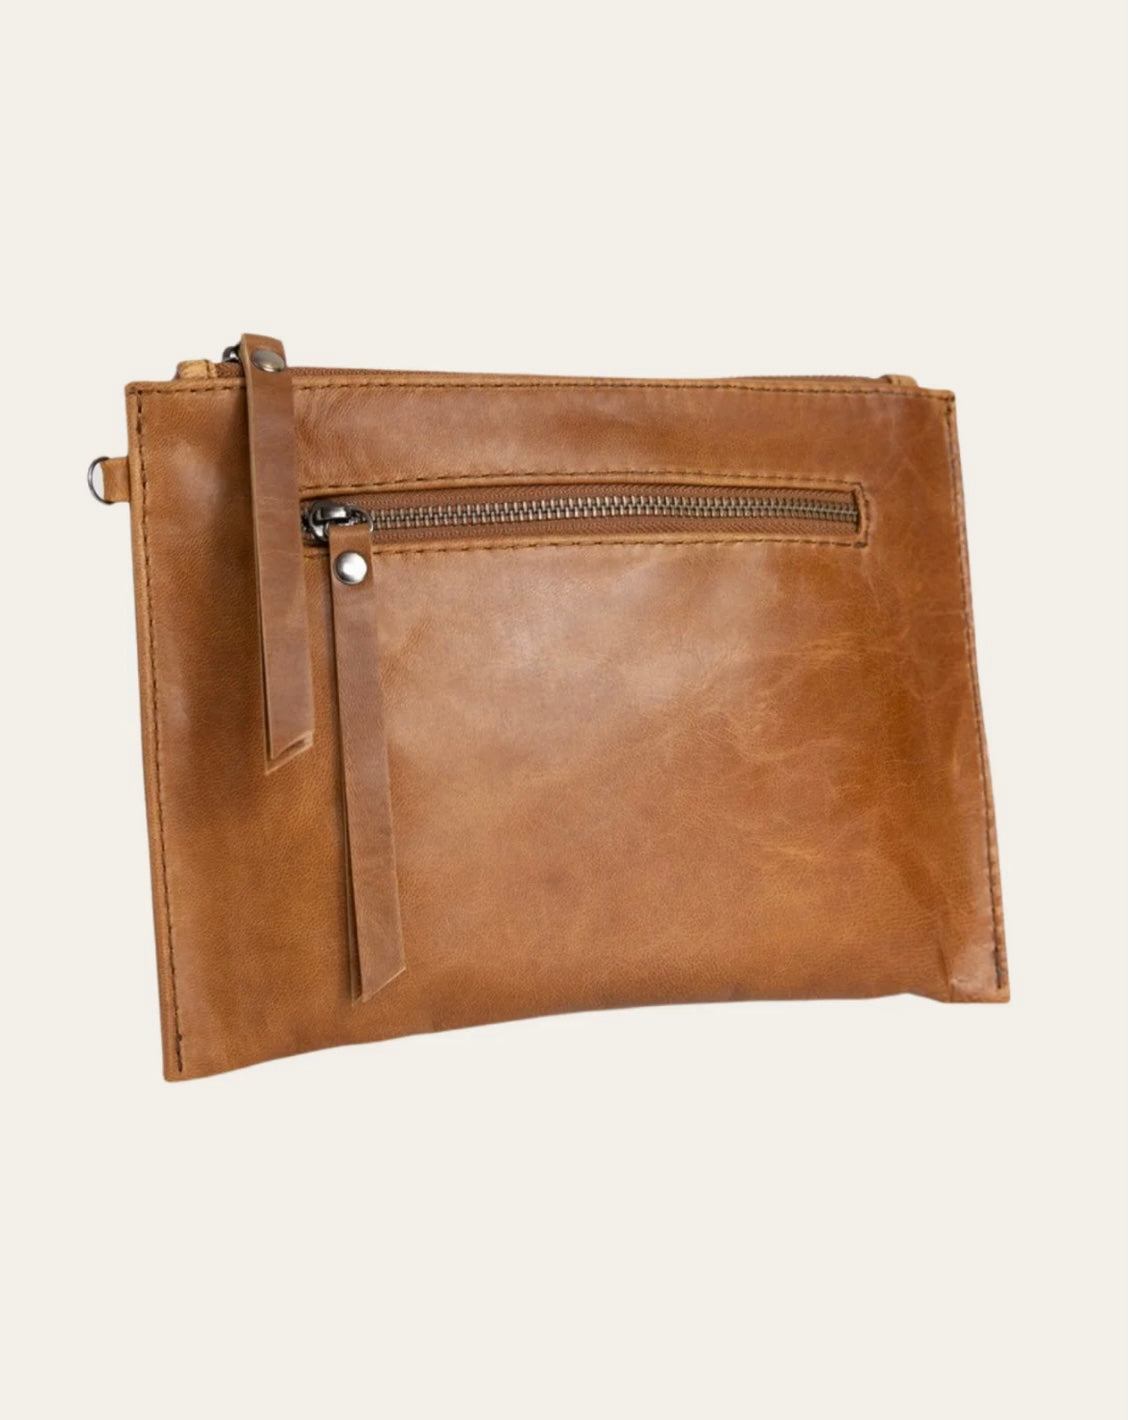 Bare Leather Coco Clutch